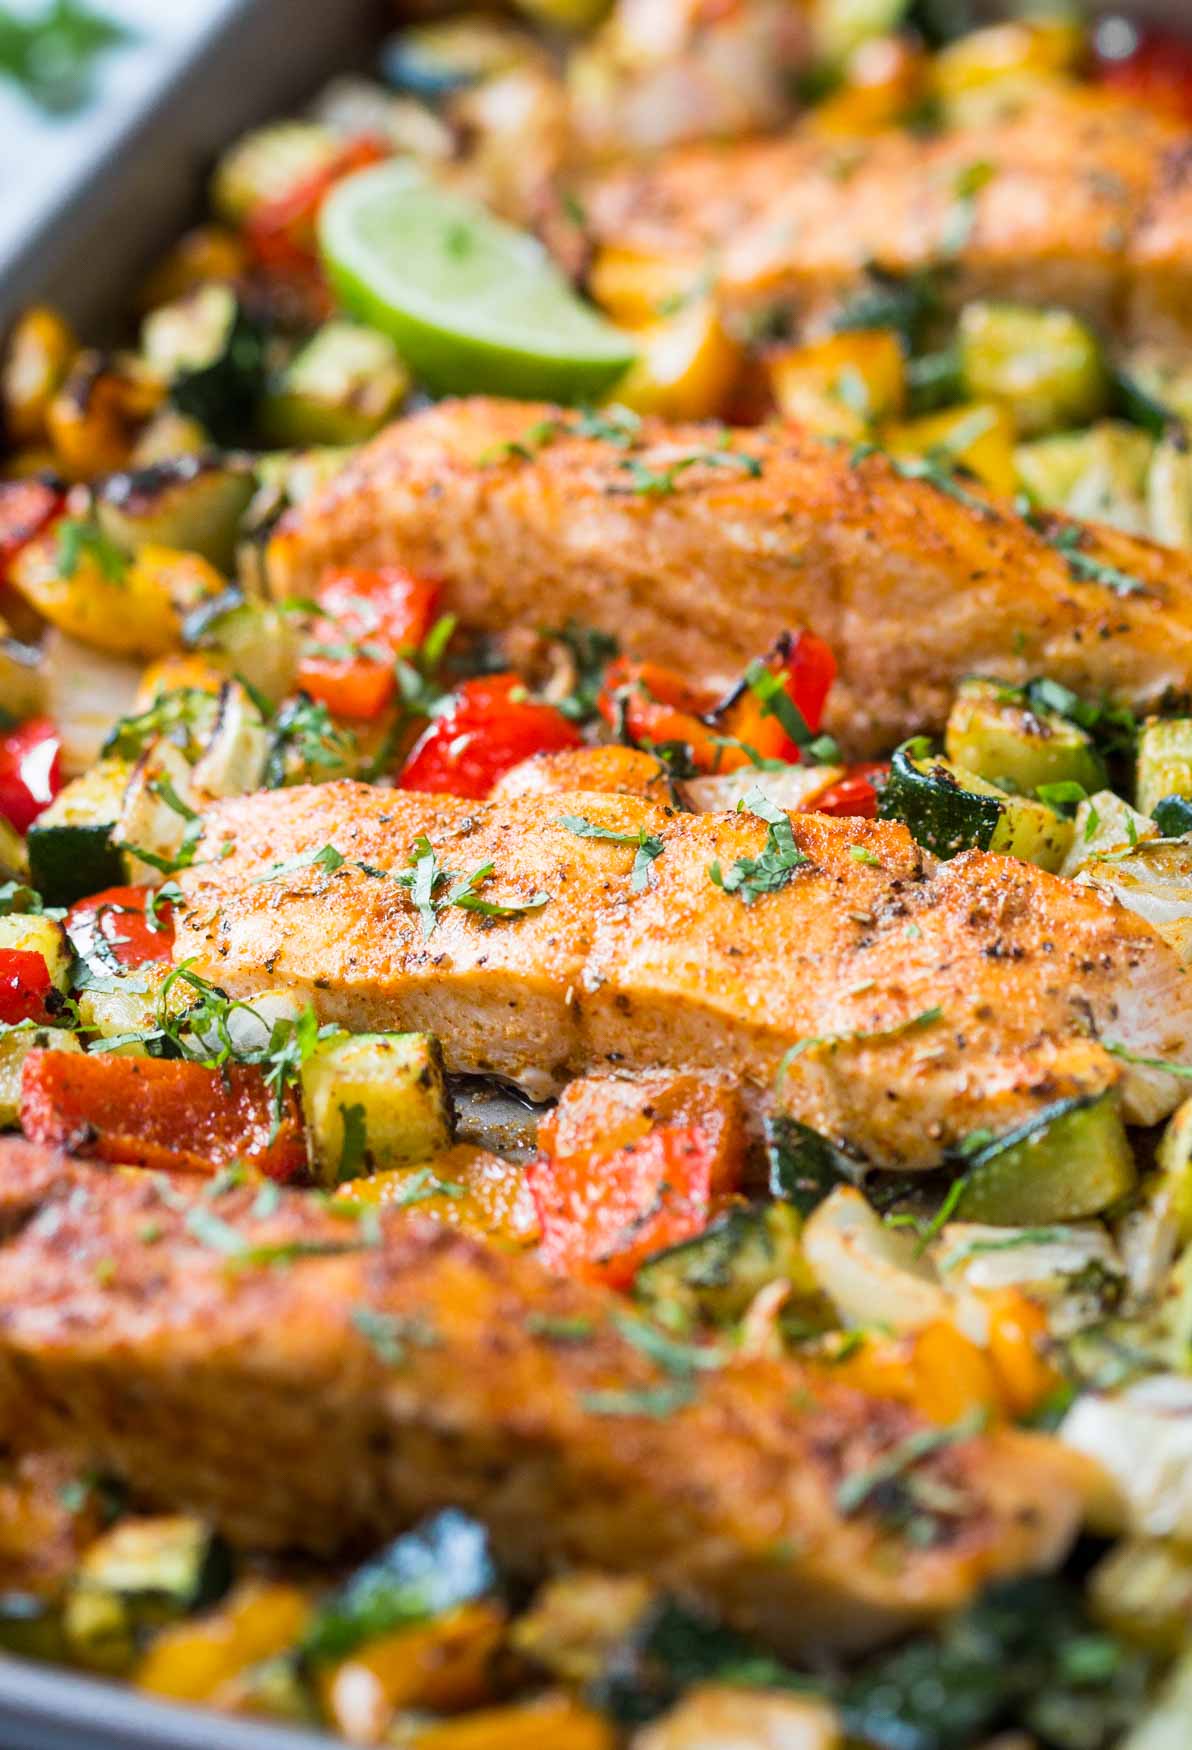 30 Min Healthy One Pan Baked Salmon And Vegetables